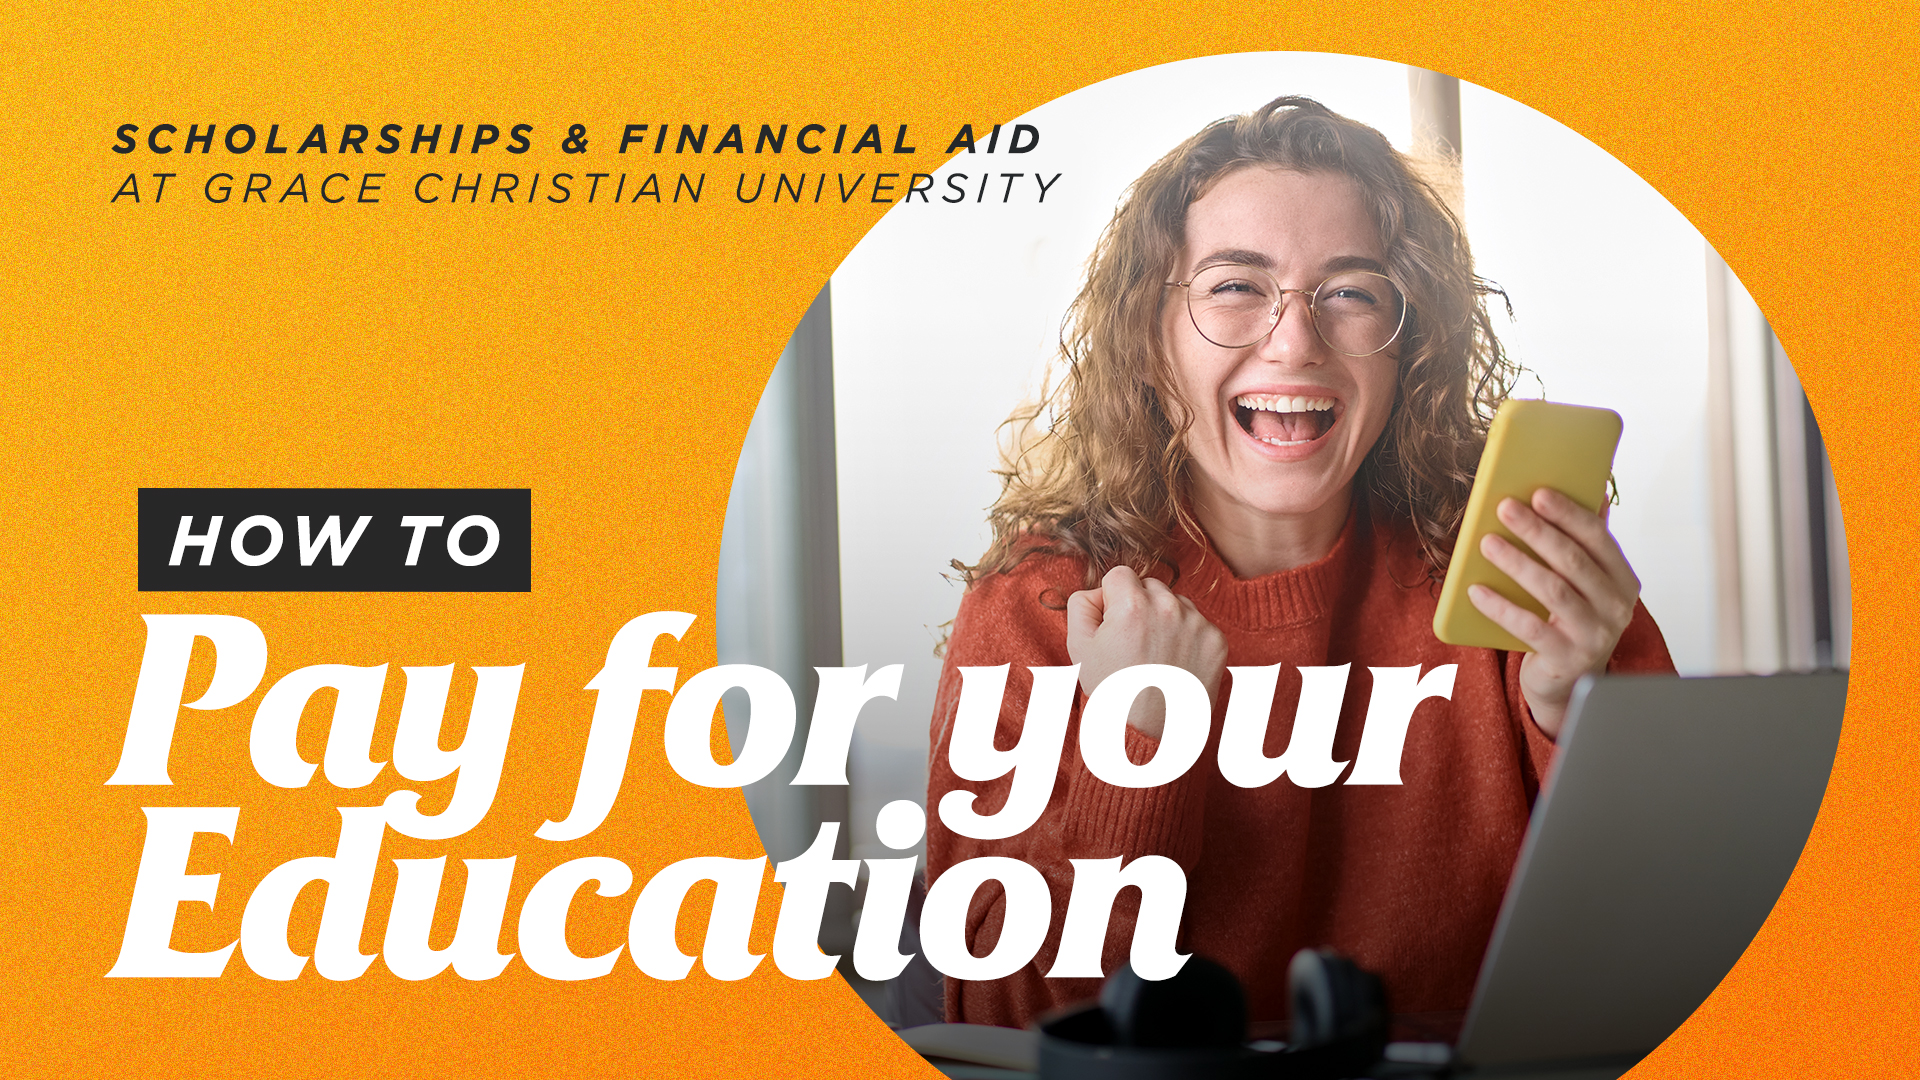 How to Pay for Your Education: Scholarships and Financial Aid at Grace Christian University